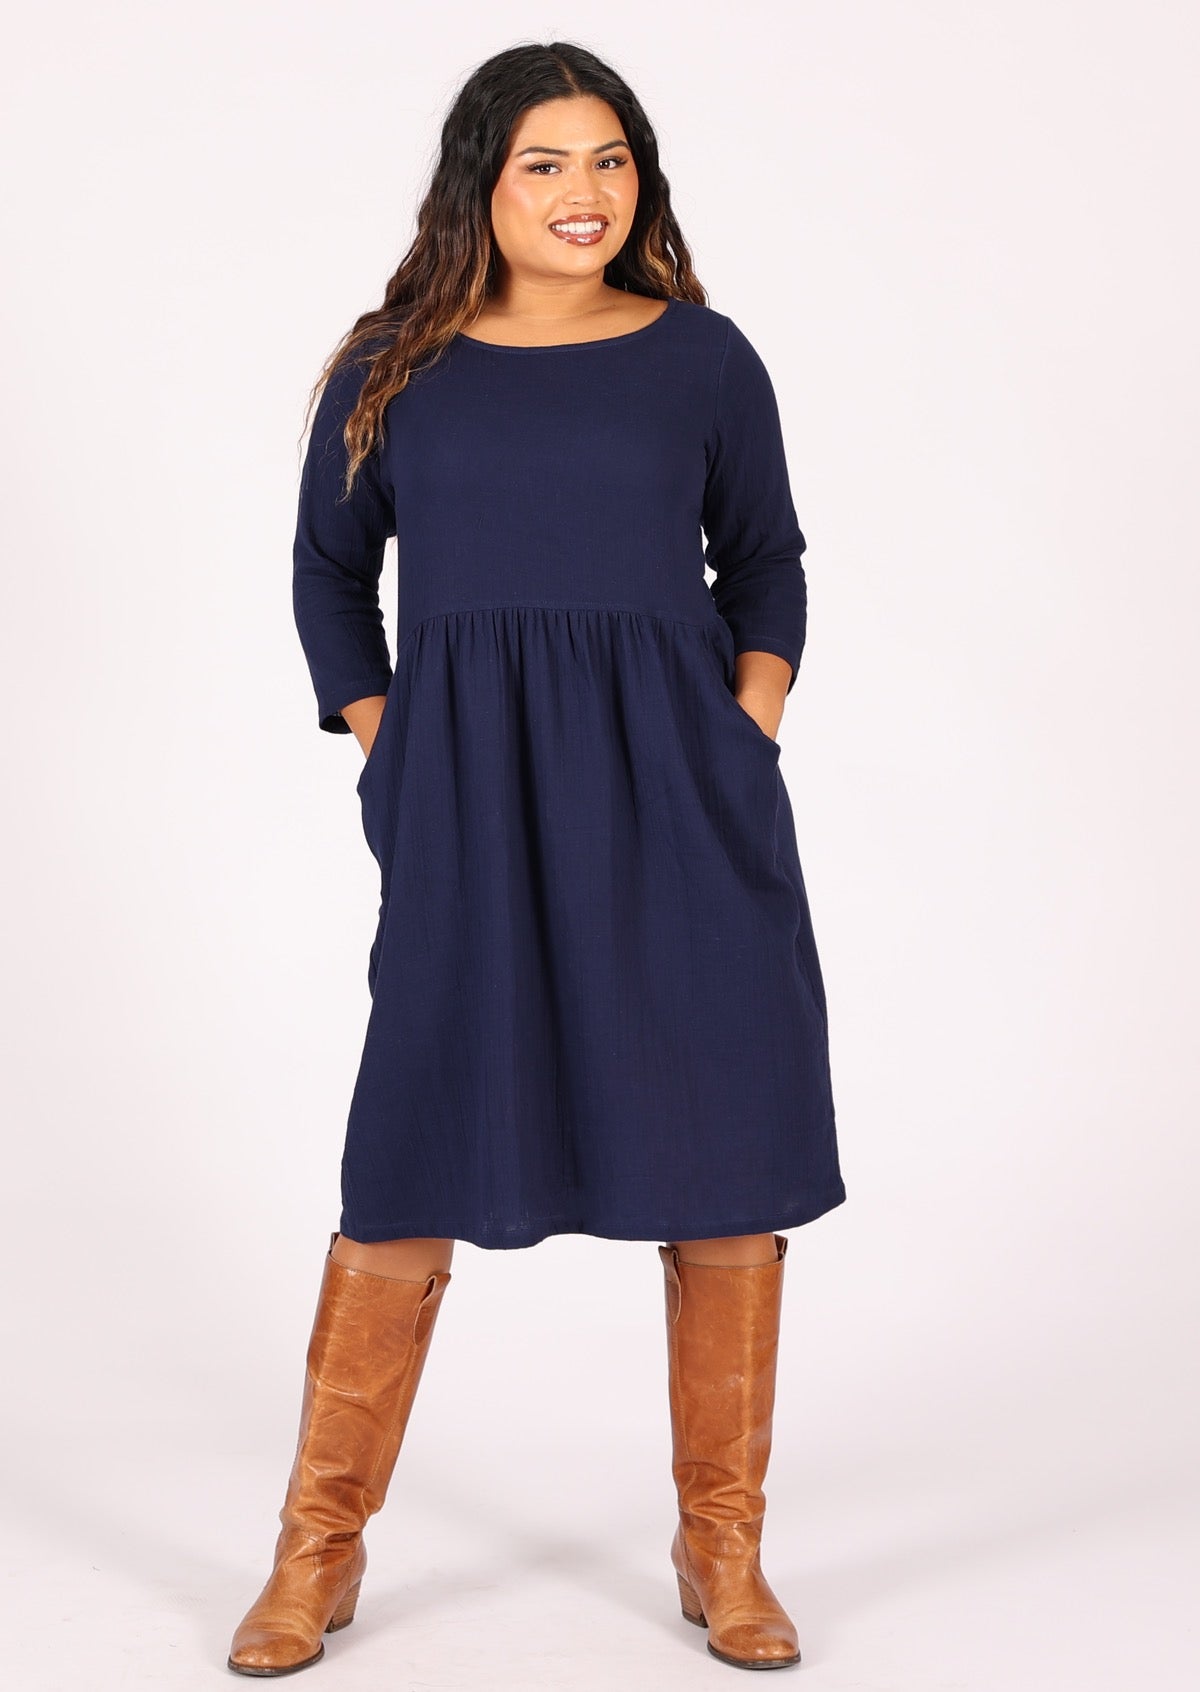 Over the knee cotton gauze dress with pockets and round neckline